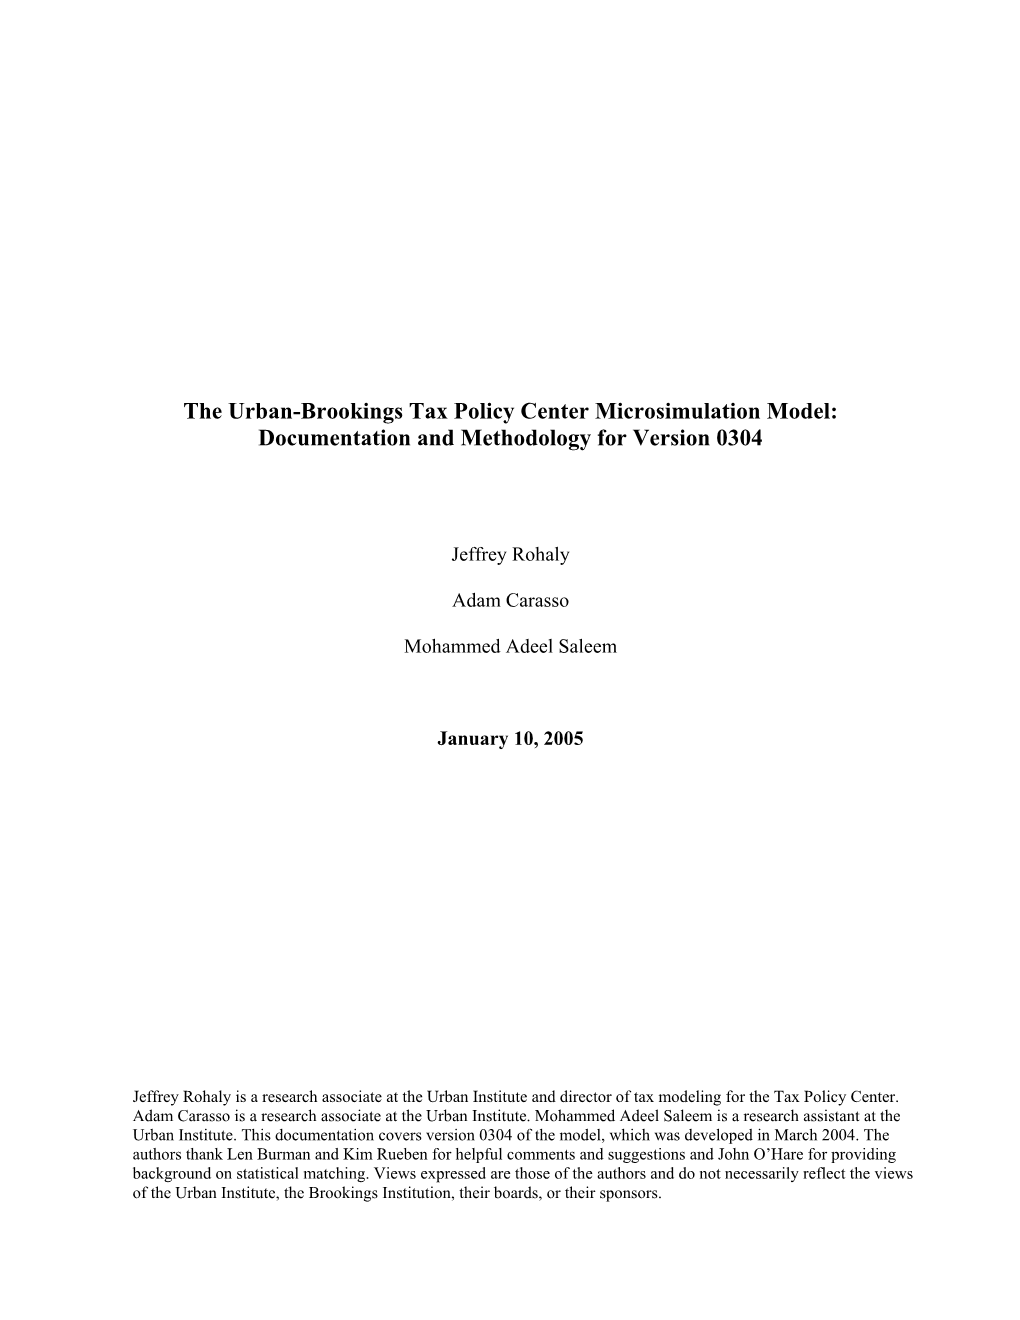 The Urban-Brookings Tax Policy Center Microsimulation Model: Documentation and Methodology for Version 0304